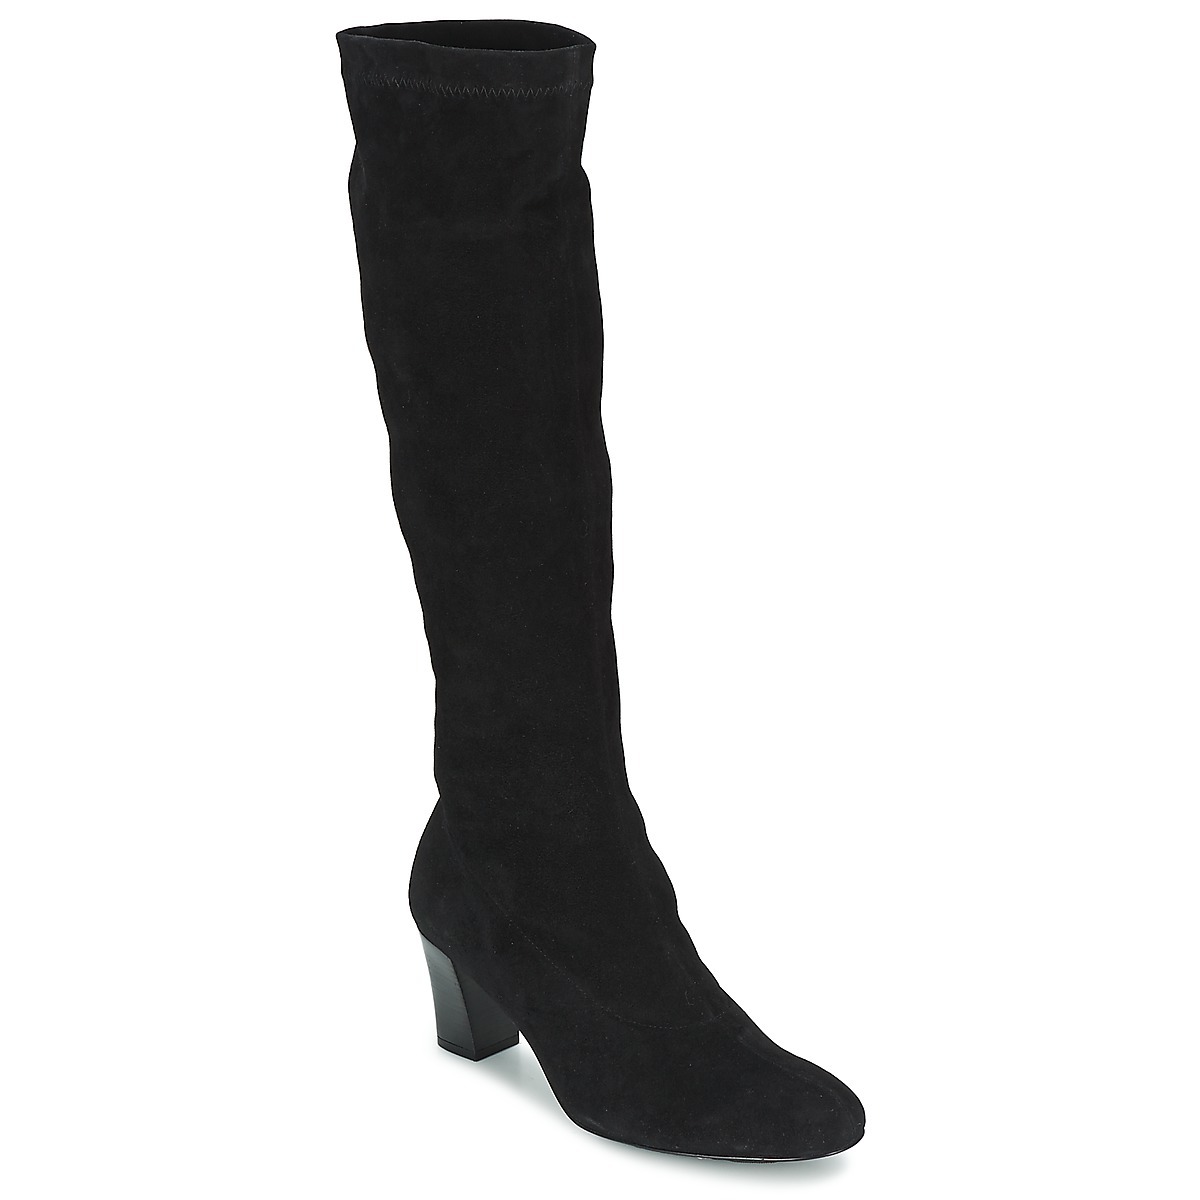 Spartoo Lady Black Boots by Robert Clergerie GOOFASH